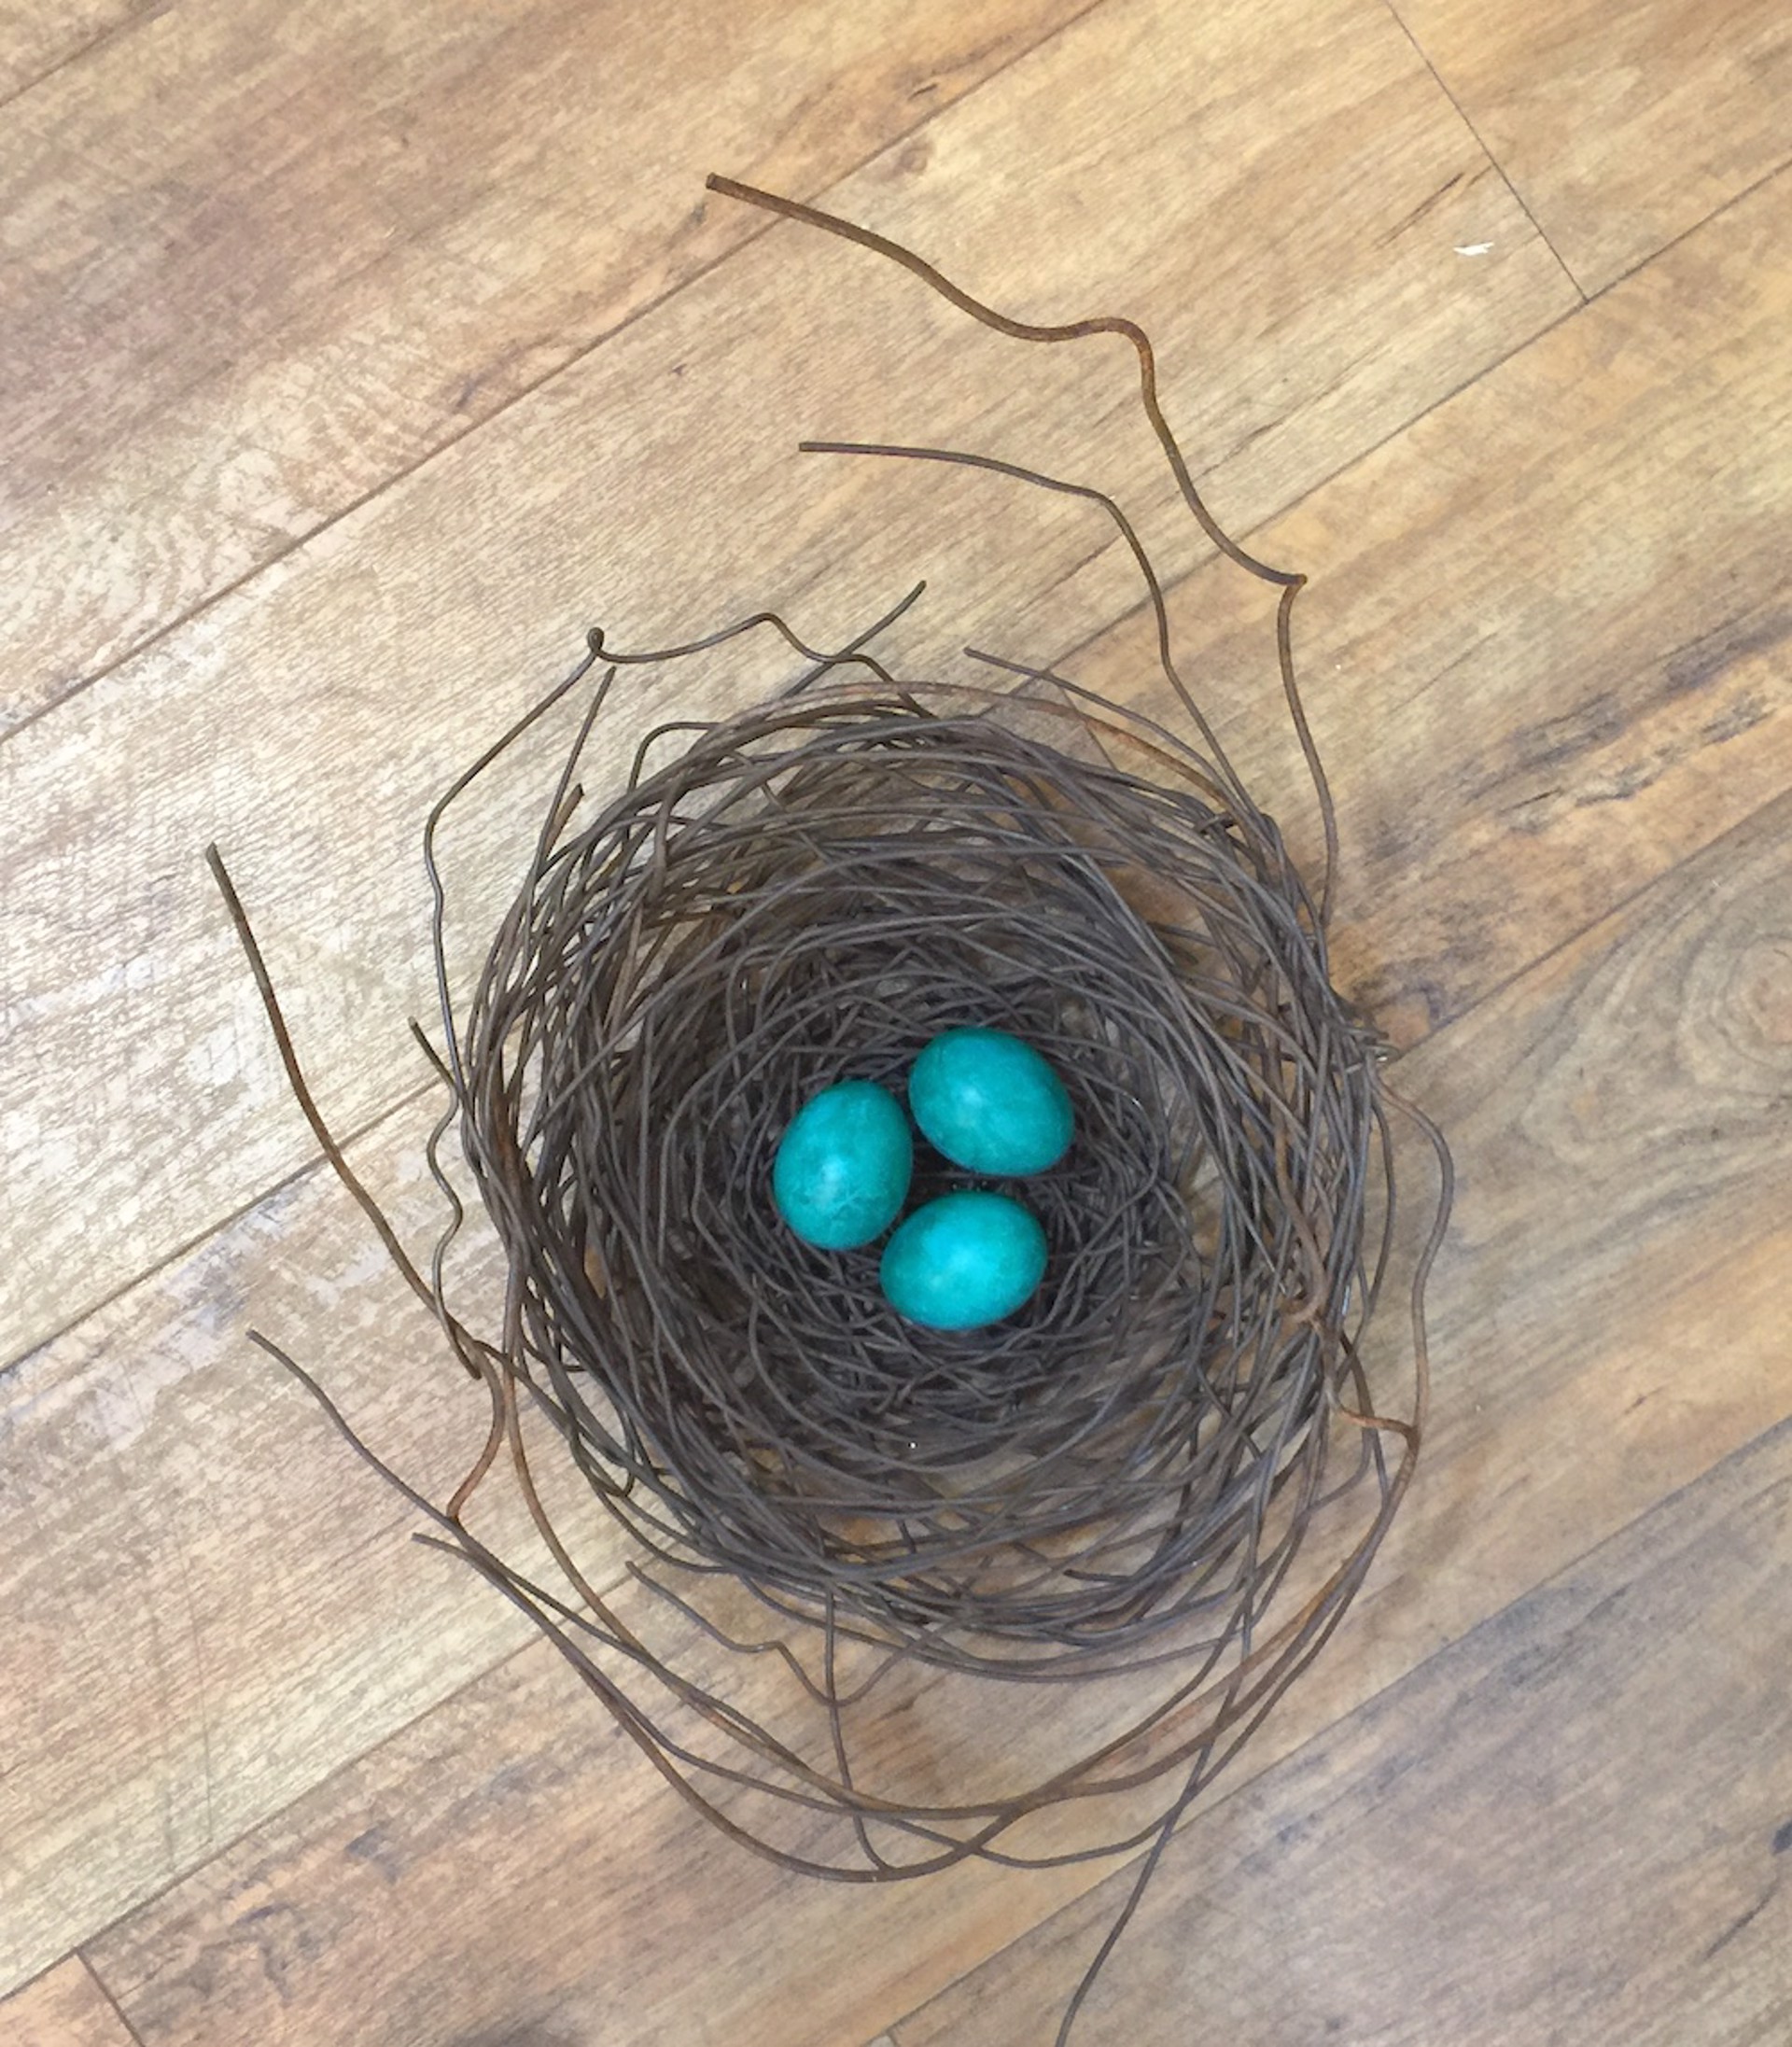 Hand Woven Wire Nest With 3 Green Ceramic Eggs - 1335 by Phil Lichtenhan